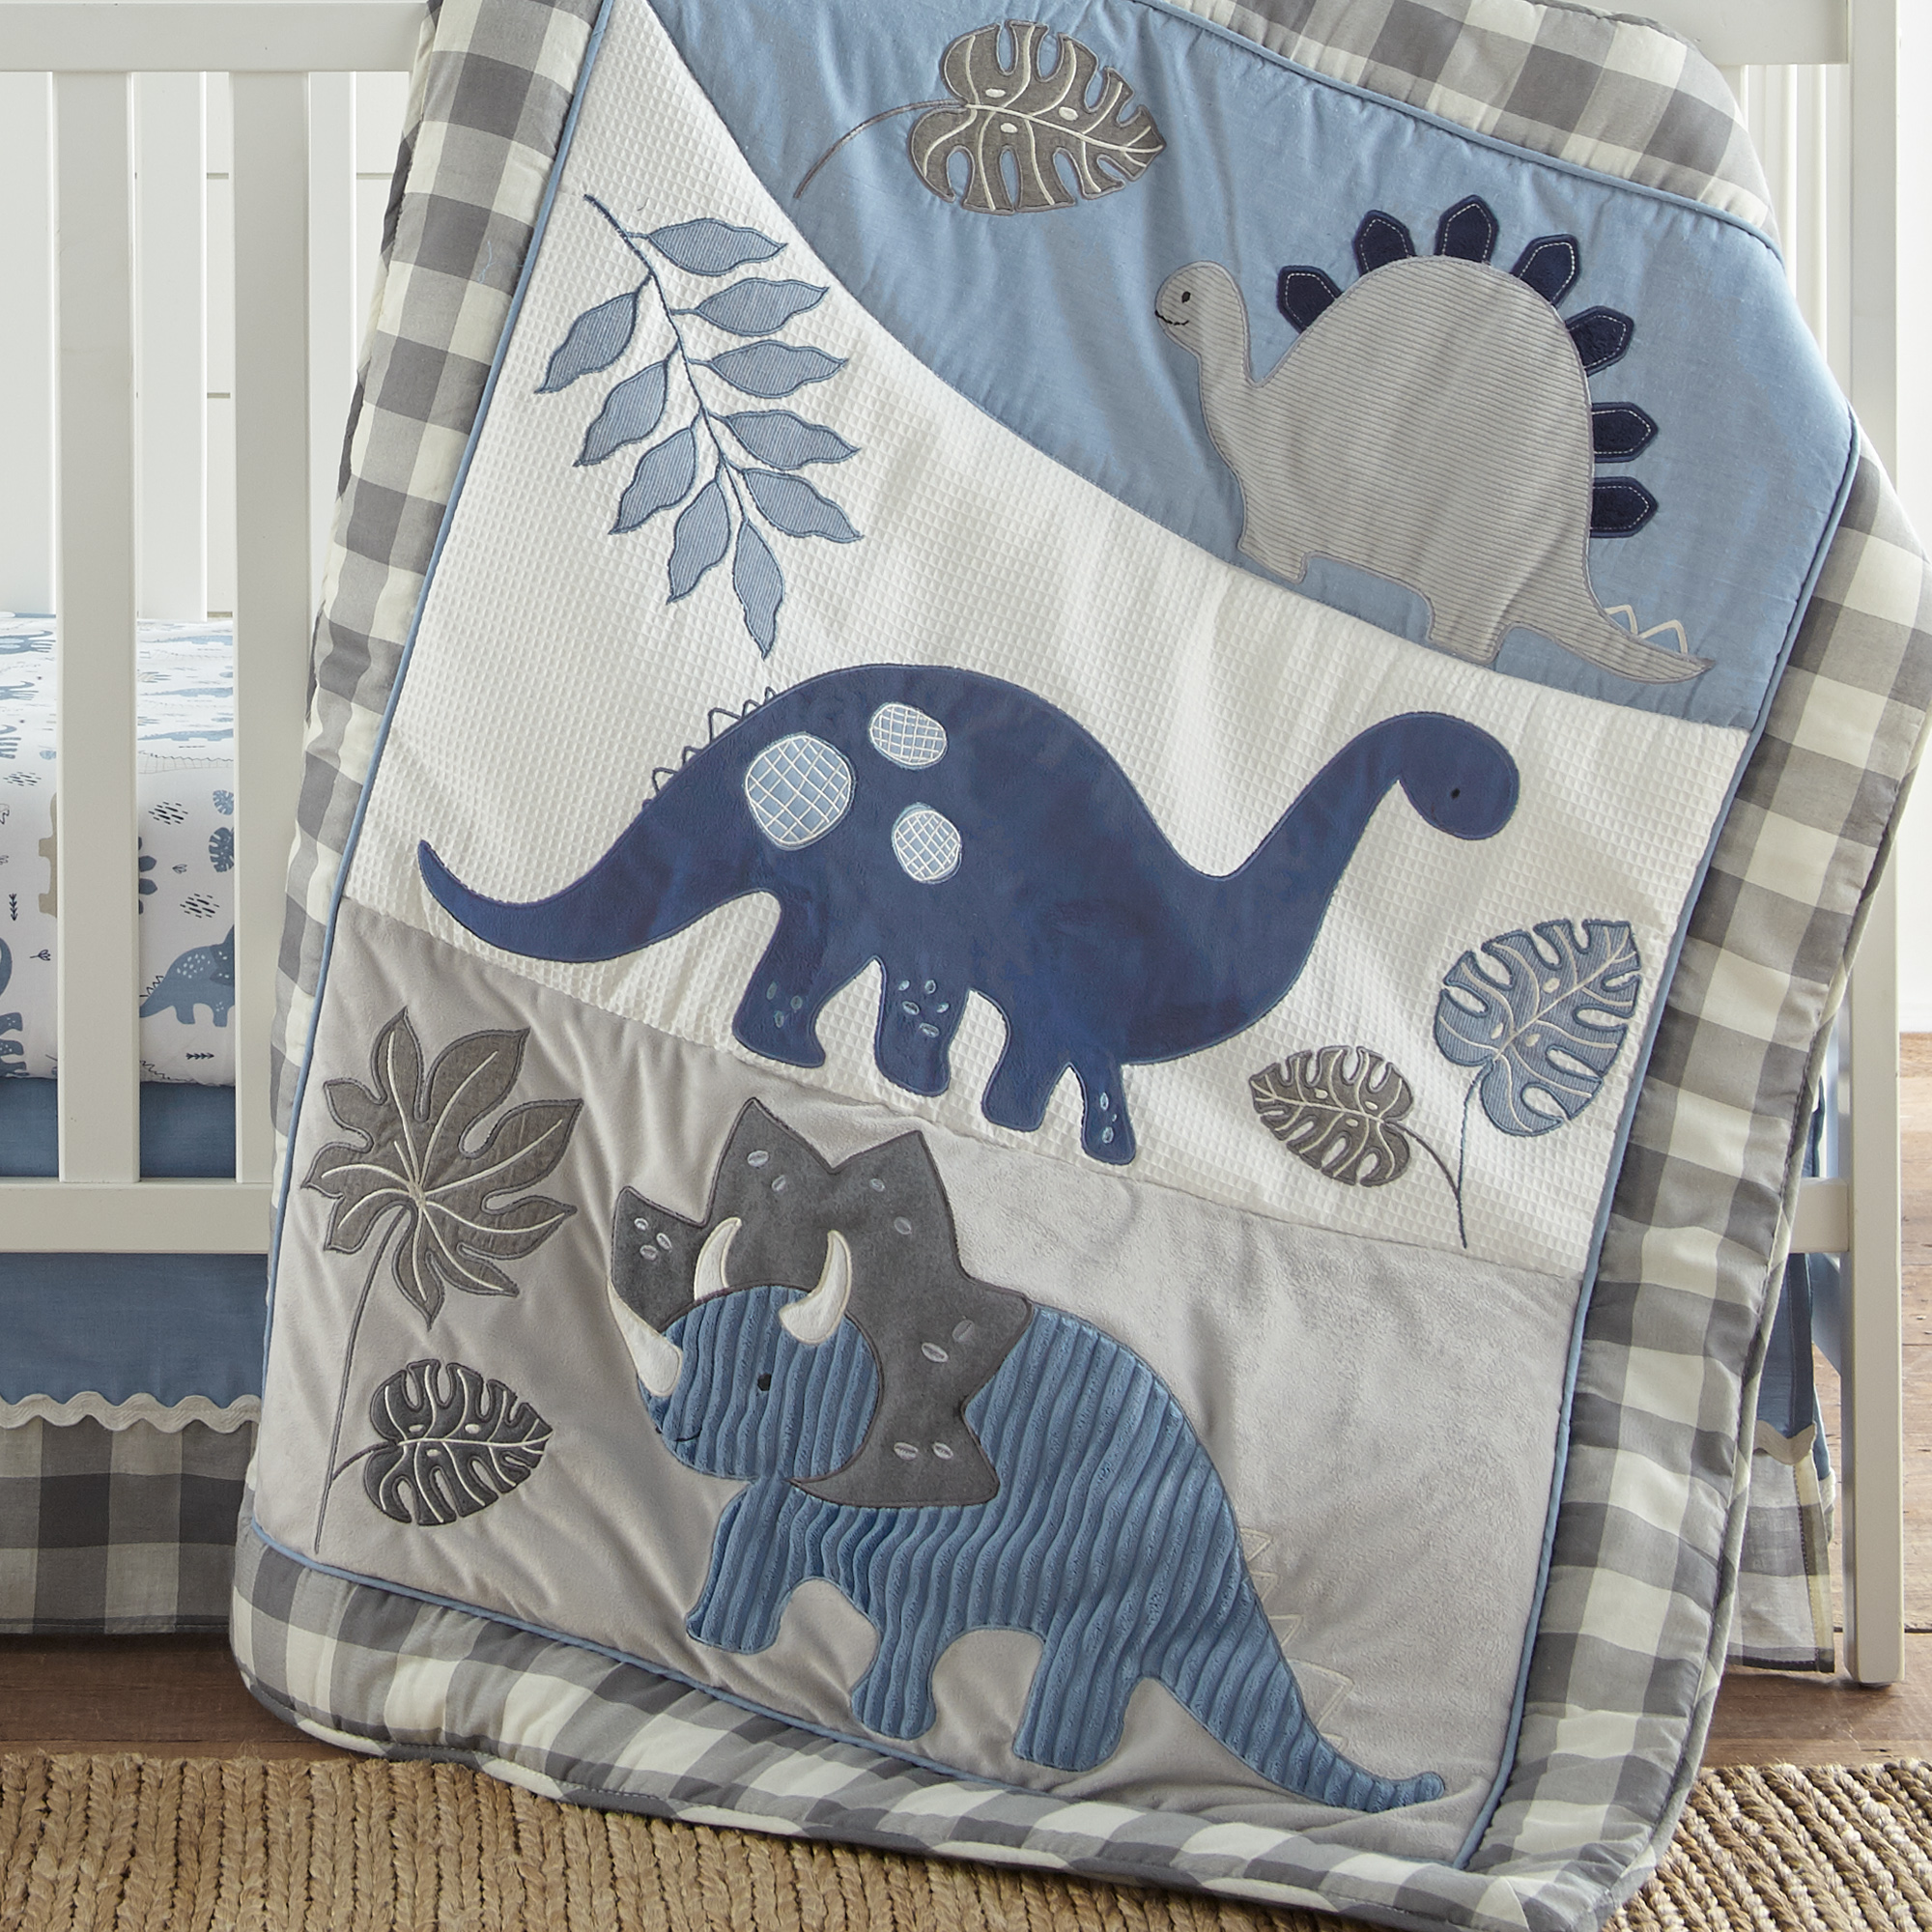 Levtex Baby - Kipton Crib Bed Set - Baby Nursery Set - Grey, White and Blue - Dinosaurs and Leaves - 4 Piece Set Includes Quilt, Fitted Sheet, Wall Decal & Skirt/Dust Ruffle - image 5 of 6